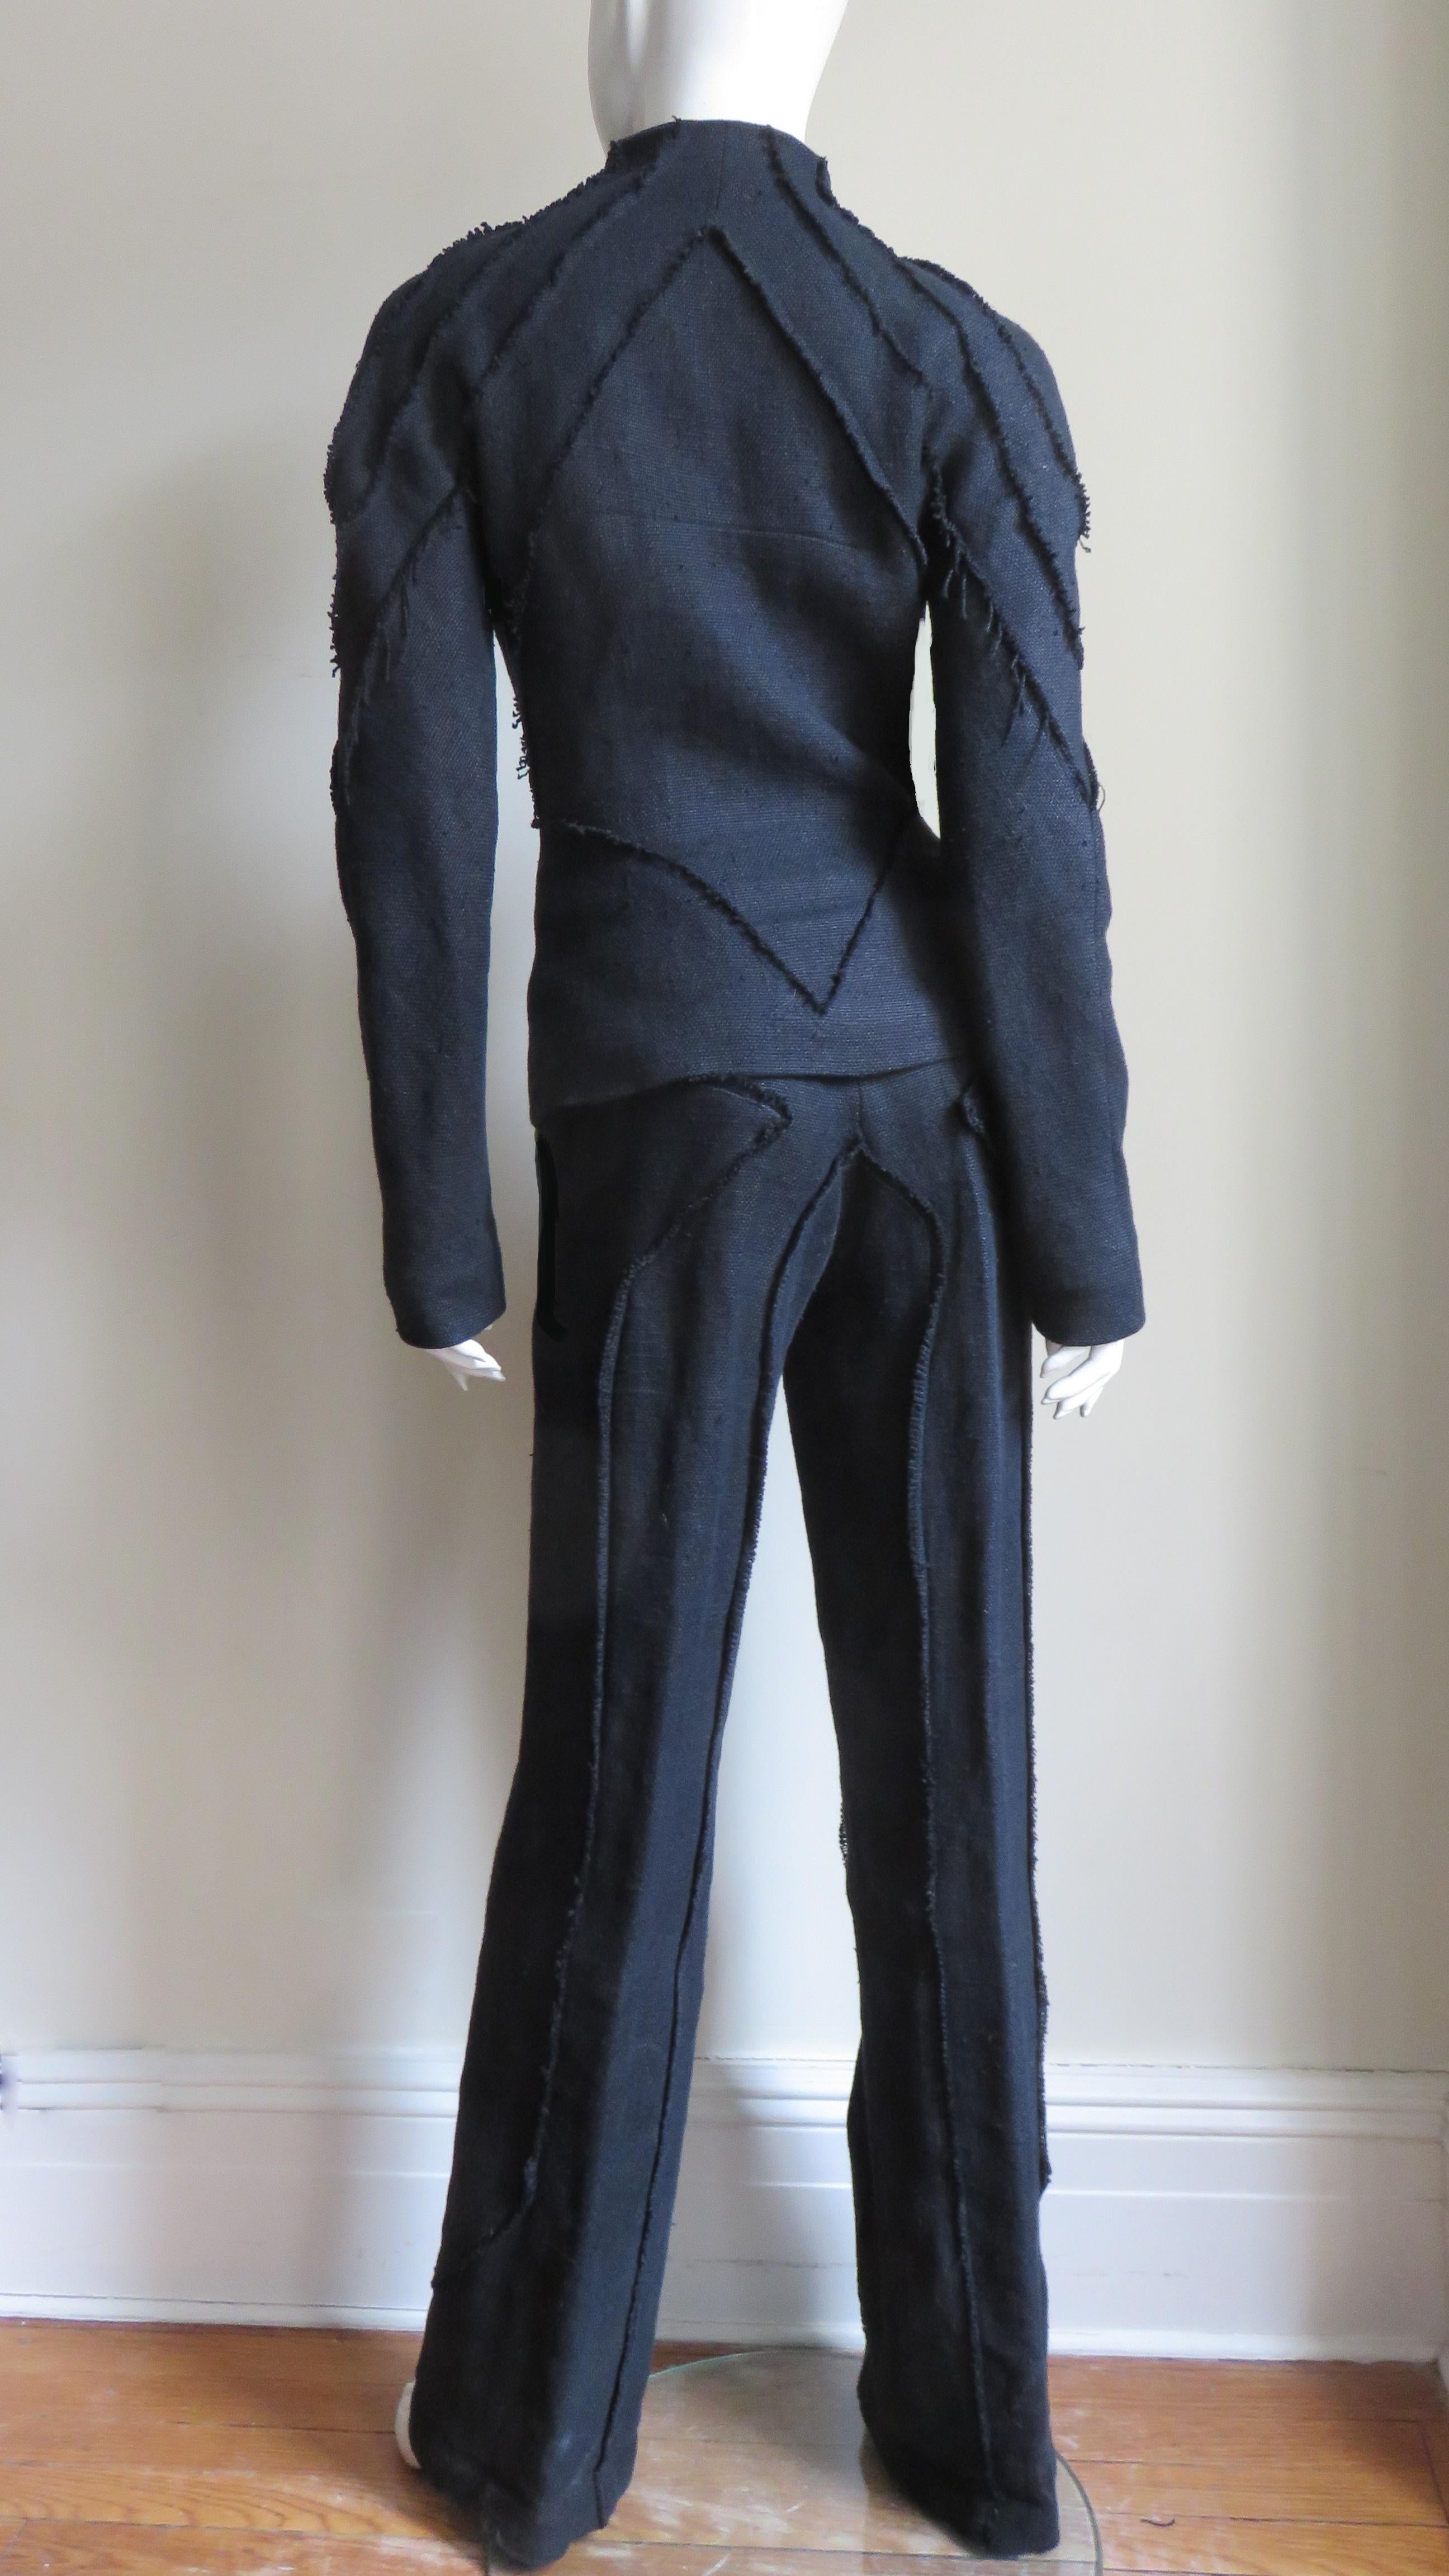 Alexander McQueen New Elaborately Seamed Jacket and Pants A/W 1999 For Sale 10